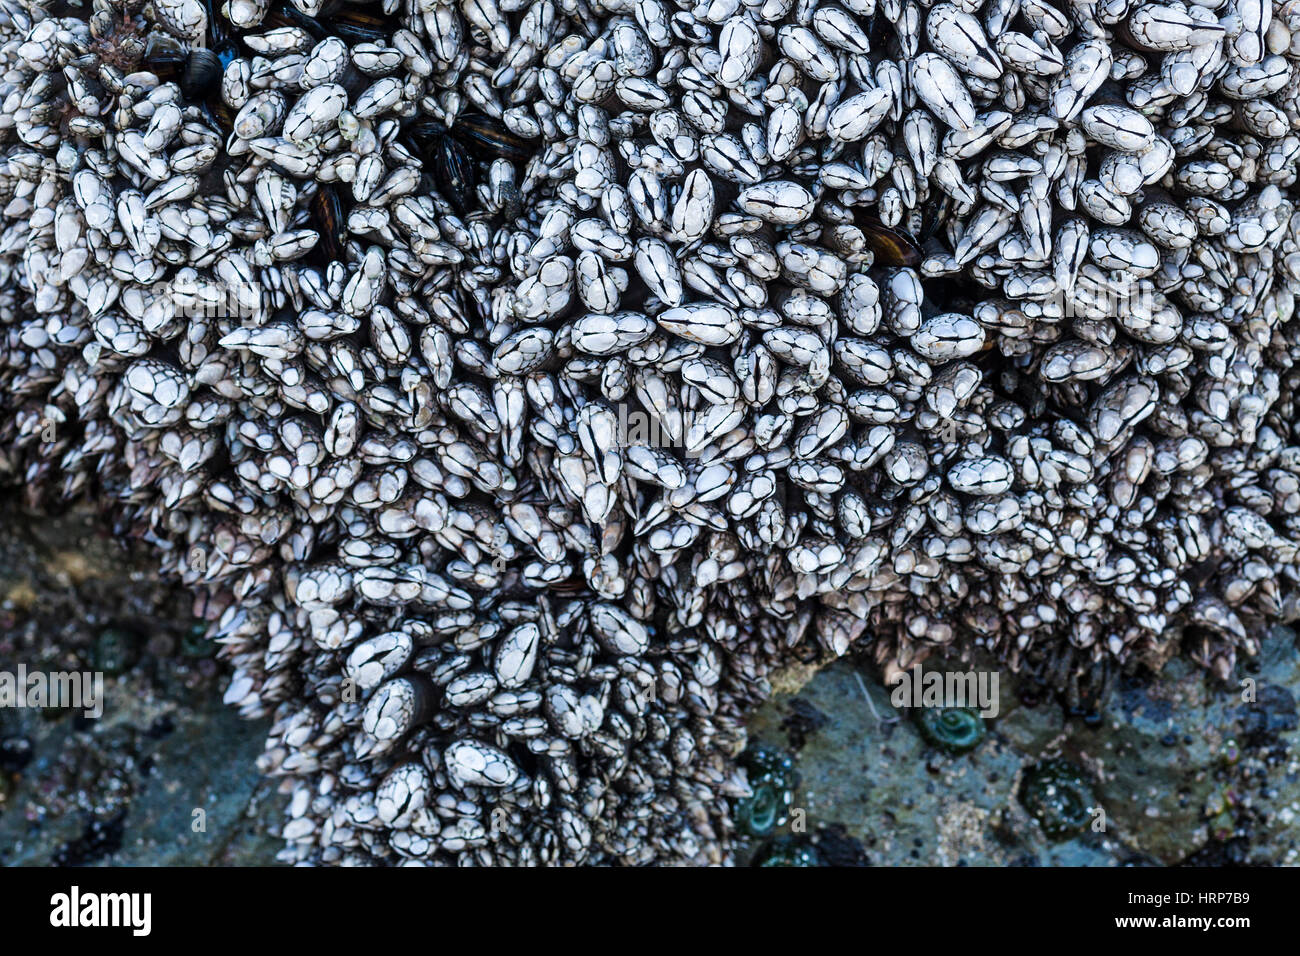 A rock covered with Goose Barnacles on the Washington Coast, USA. Stock Photo